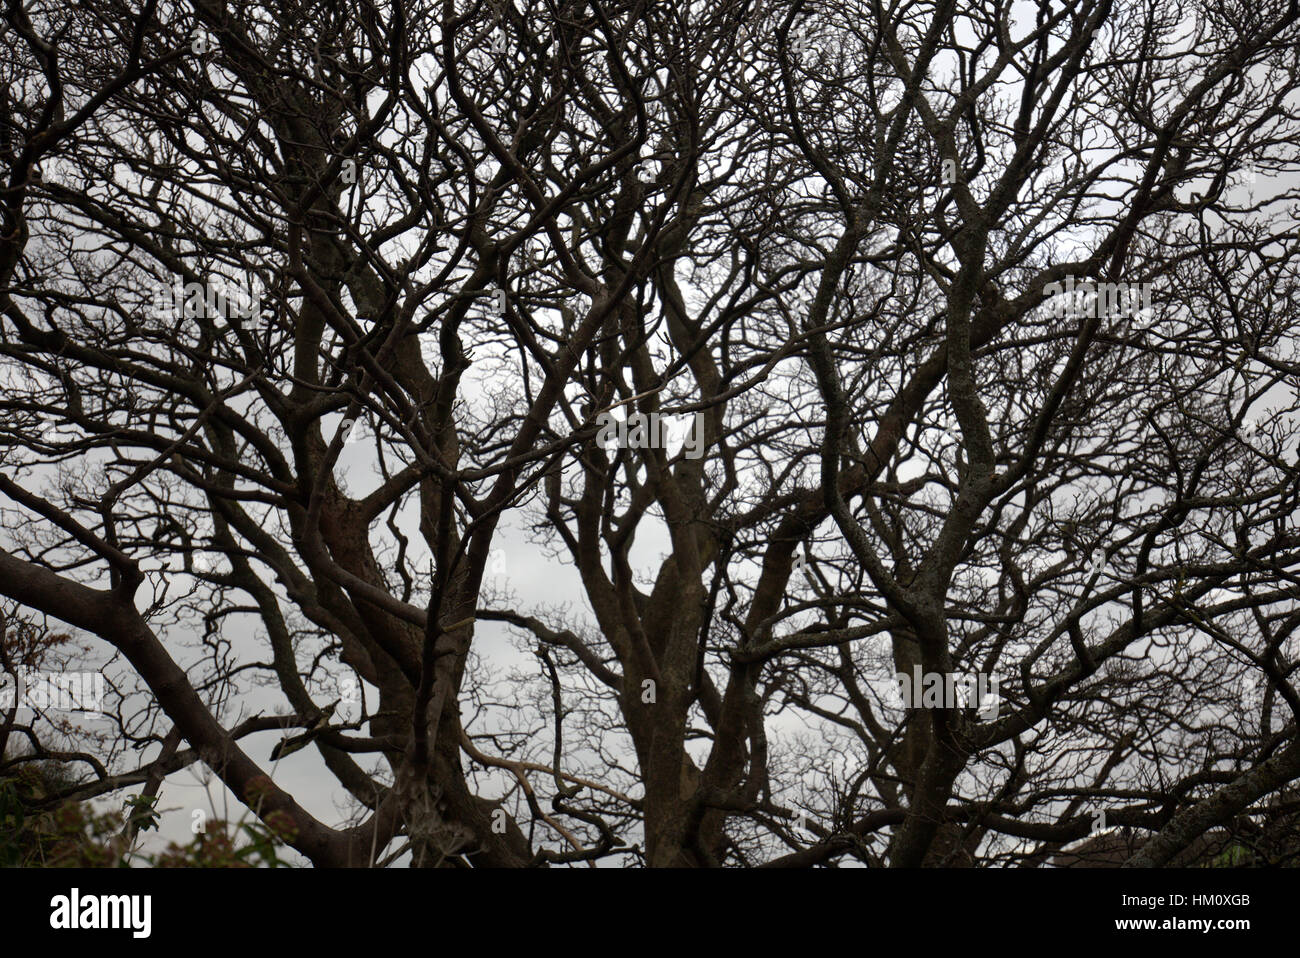 Abstract black and white colour silhouettes of tree branches against sky Stock Photo